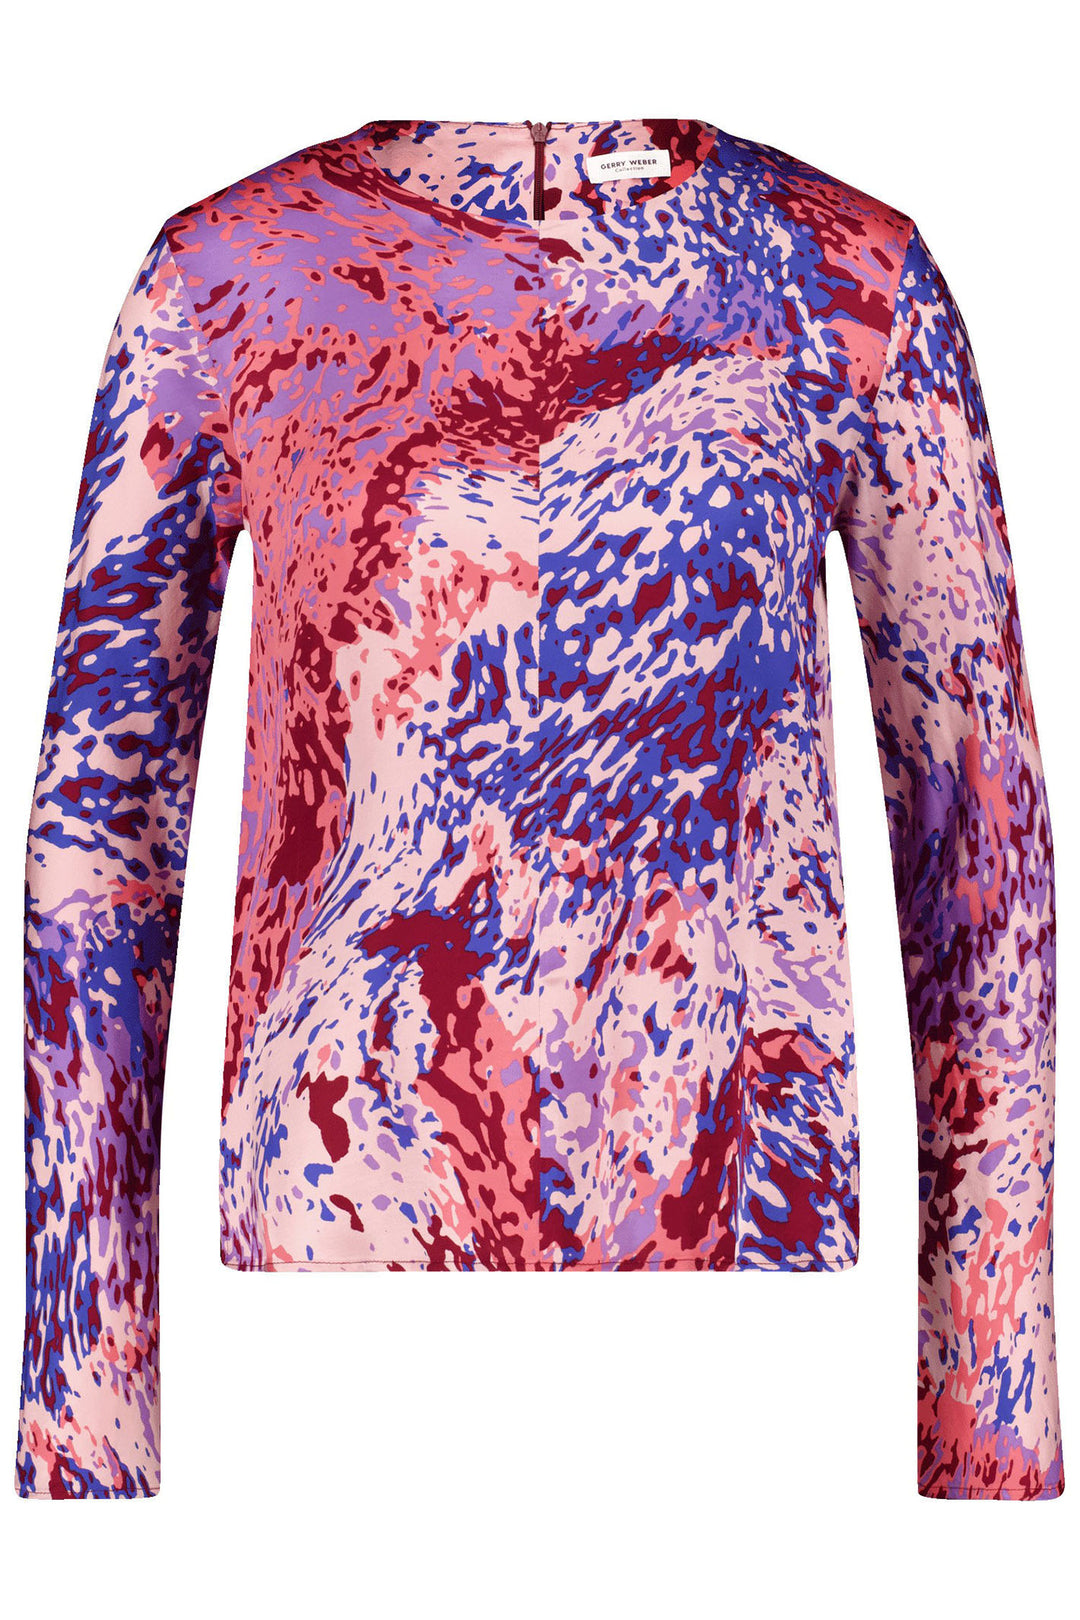 Gerry Weber 360012 31430 Blue Abstract Print Long Sleeve Top - Experience Boutique